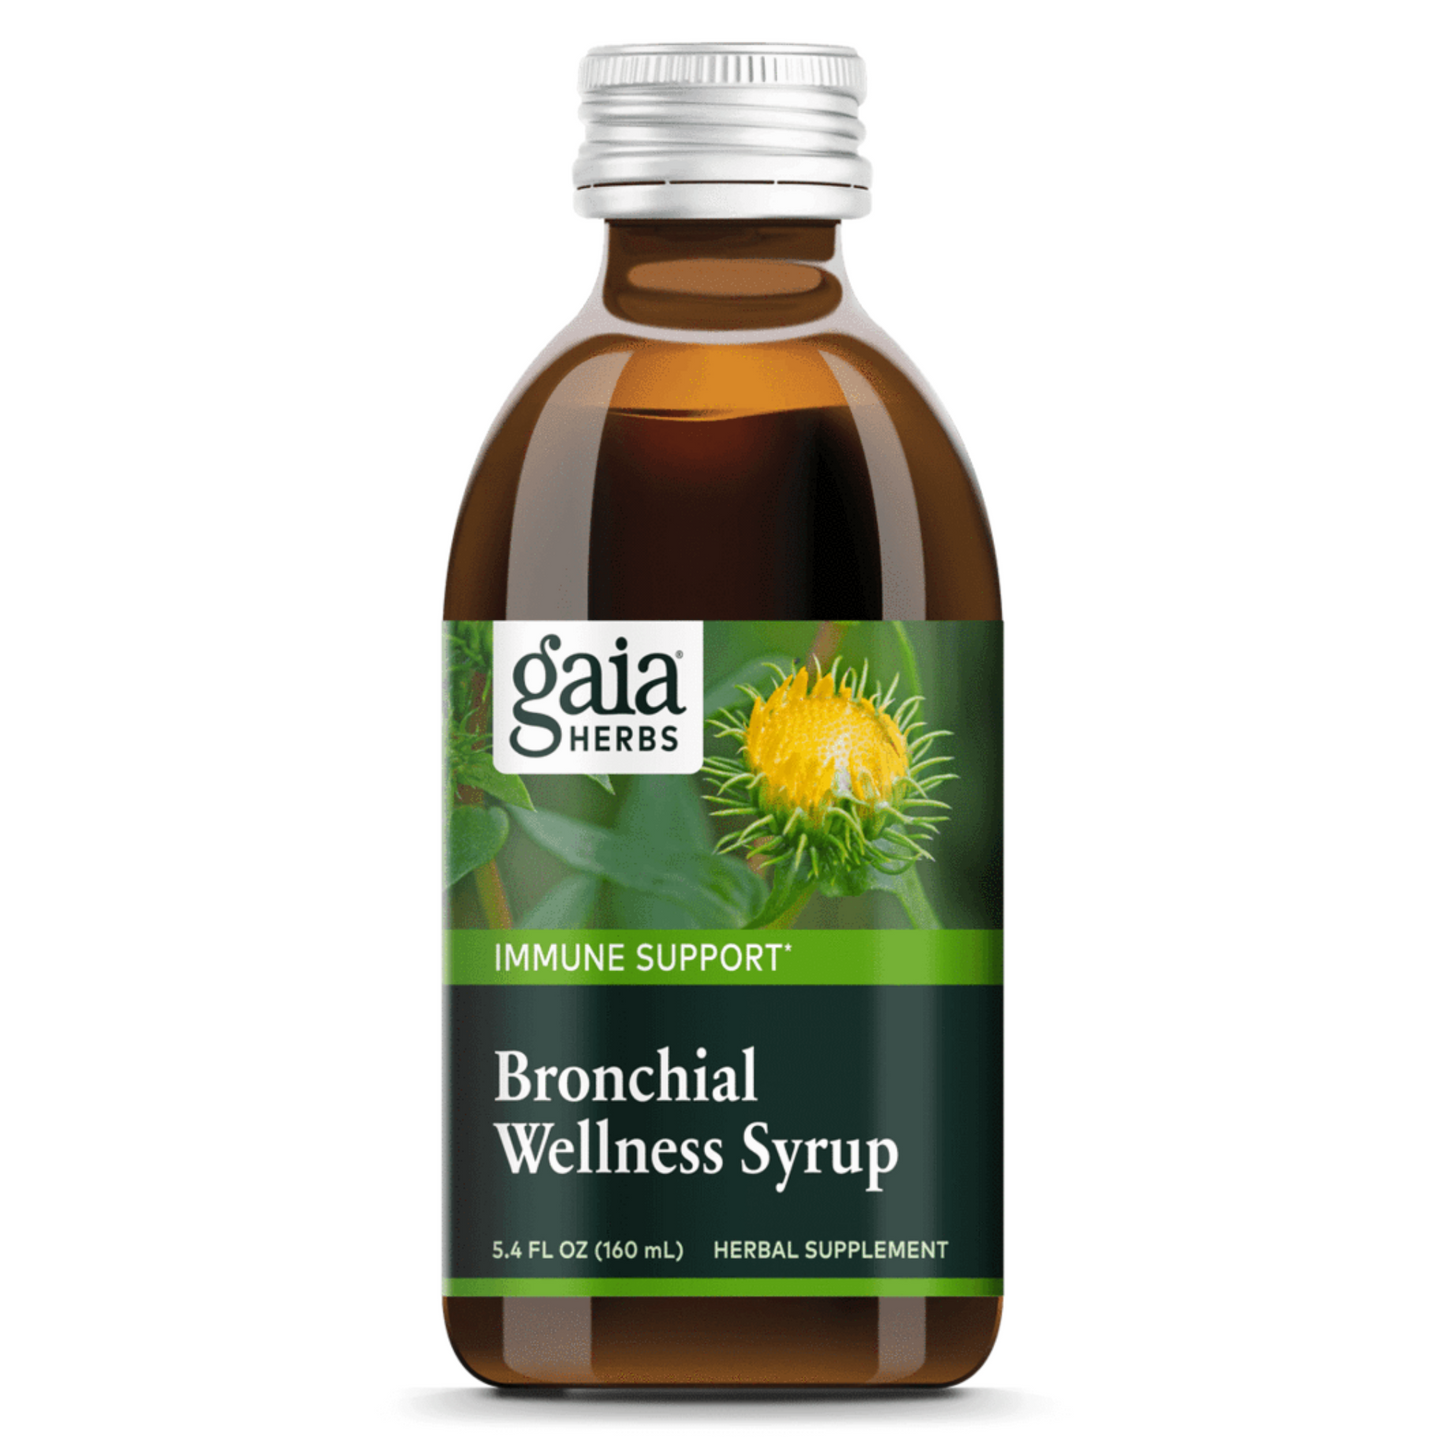 Primary Image of Bronchial Wellness Syrup